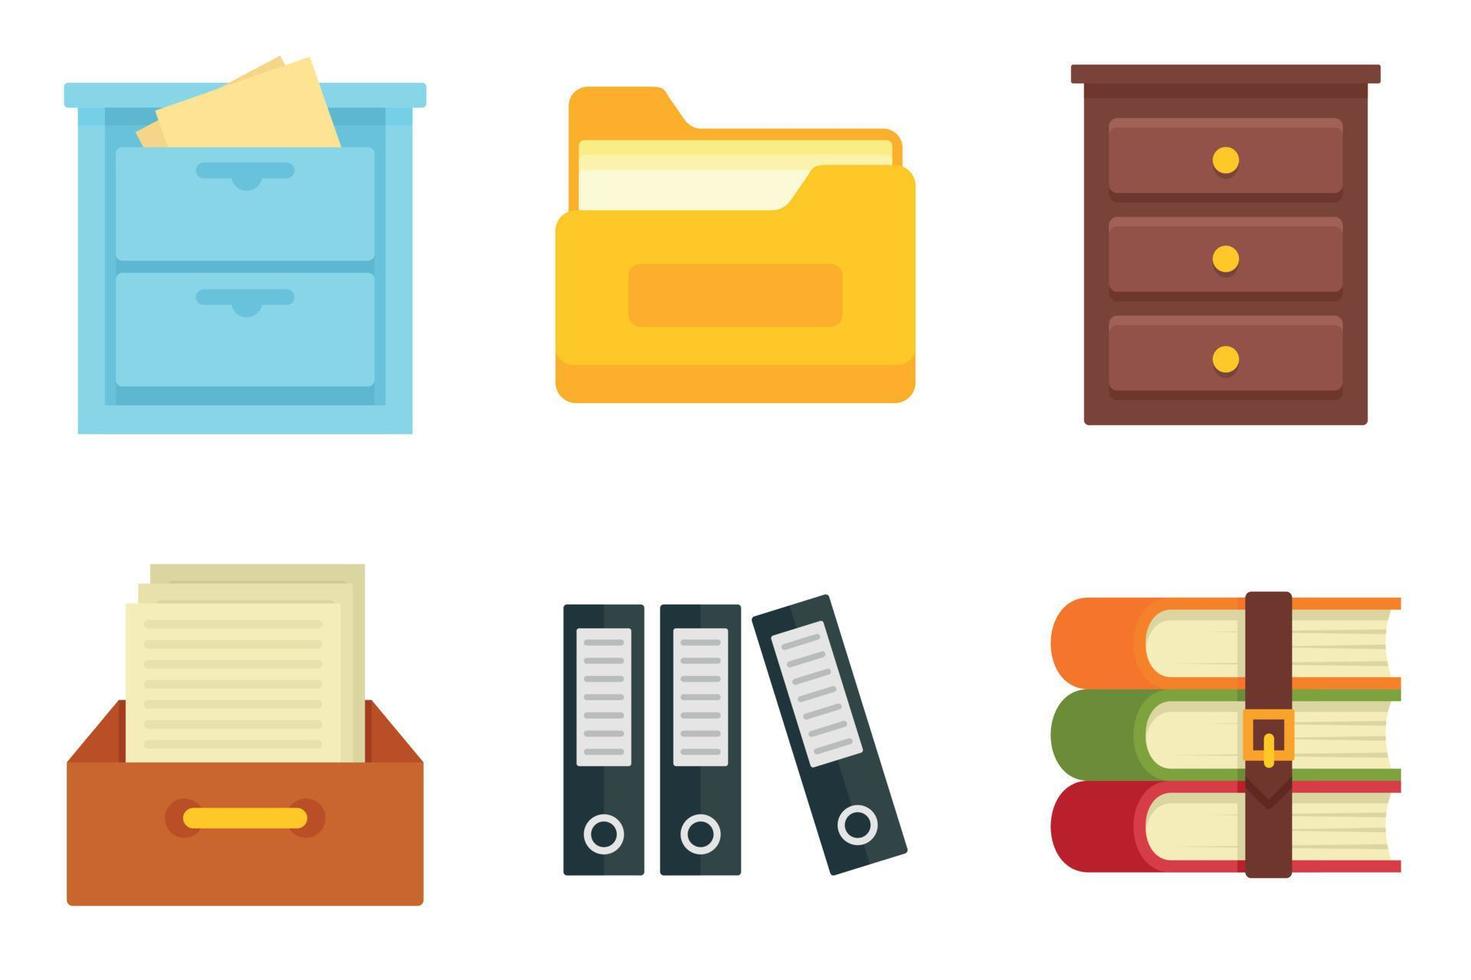 Archive icons set, flat style vector